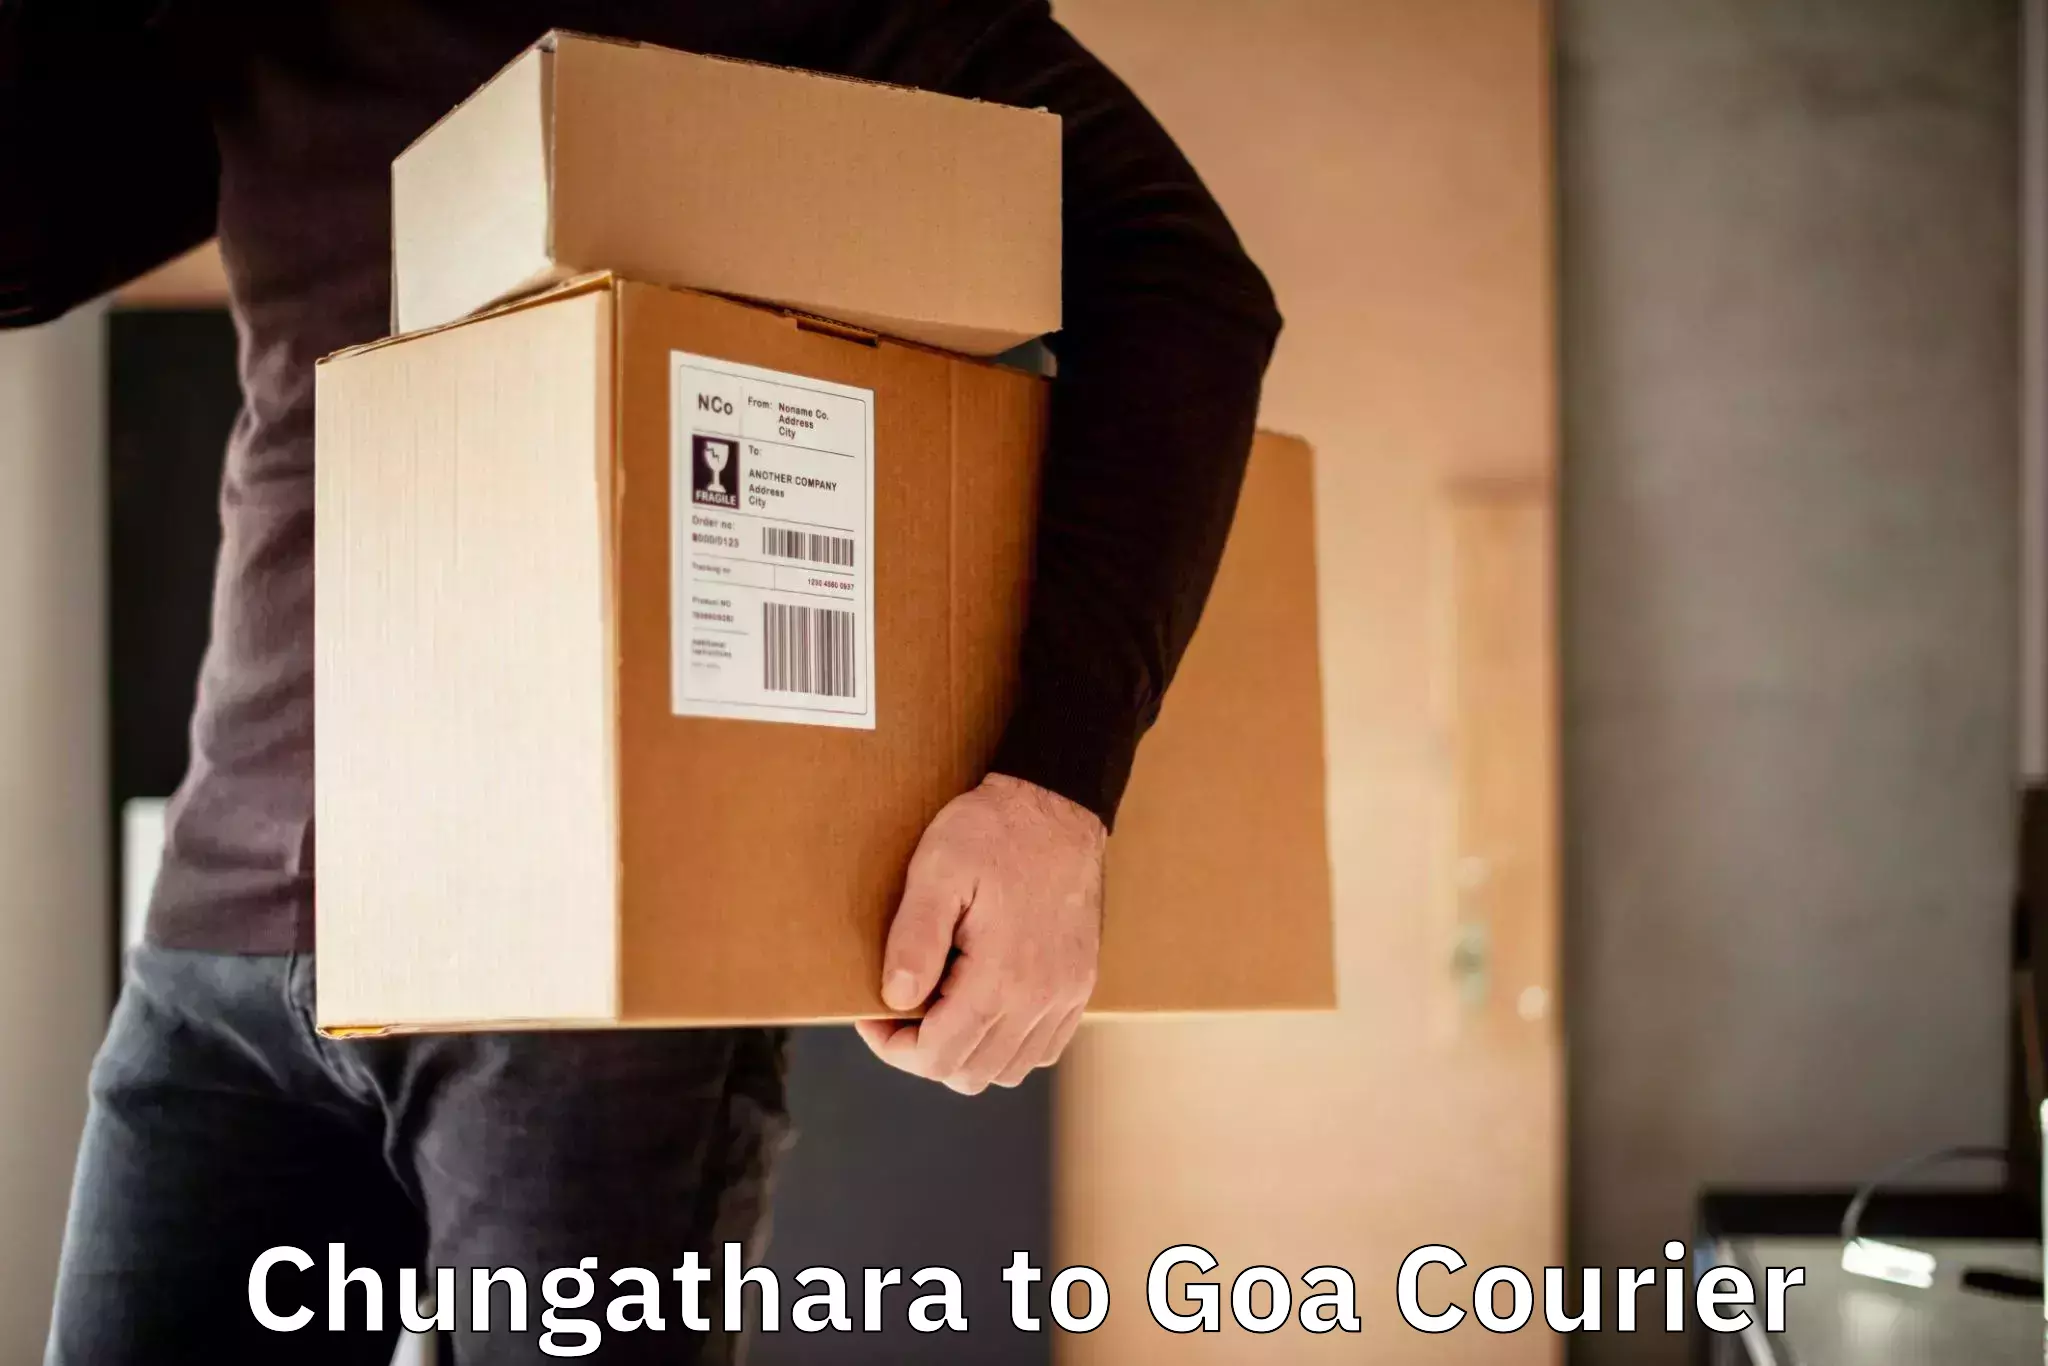 Optimized delivery routes Chungathara to South Goa